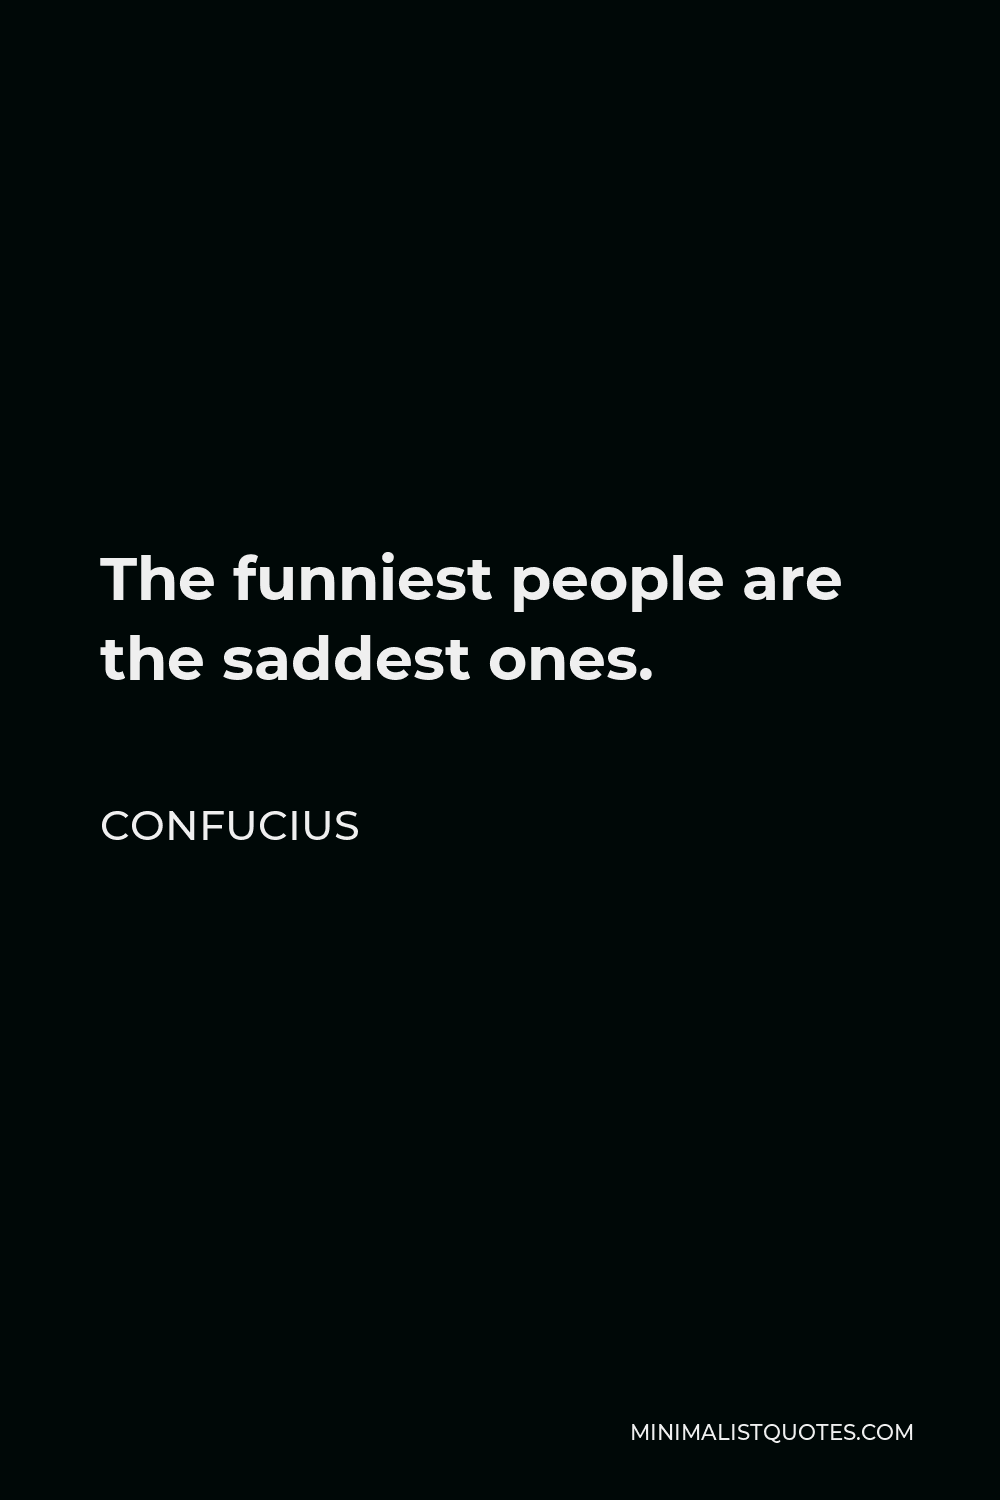 Confucius Quote - The funniest people are the saddest ones.